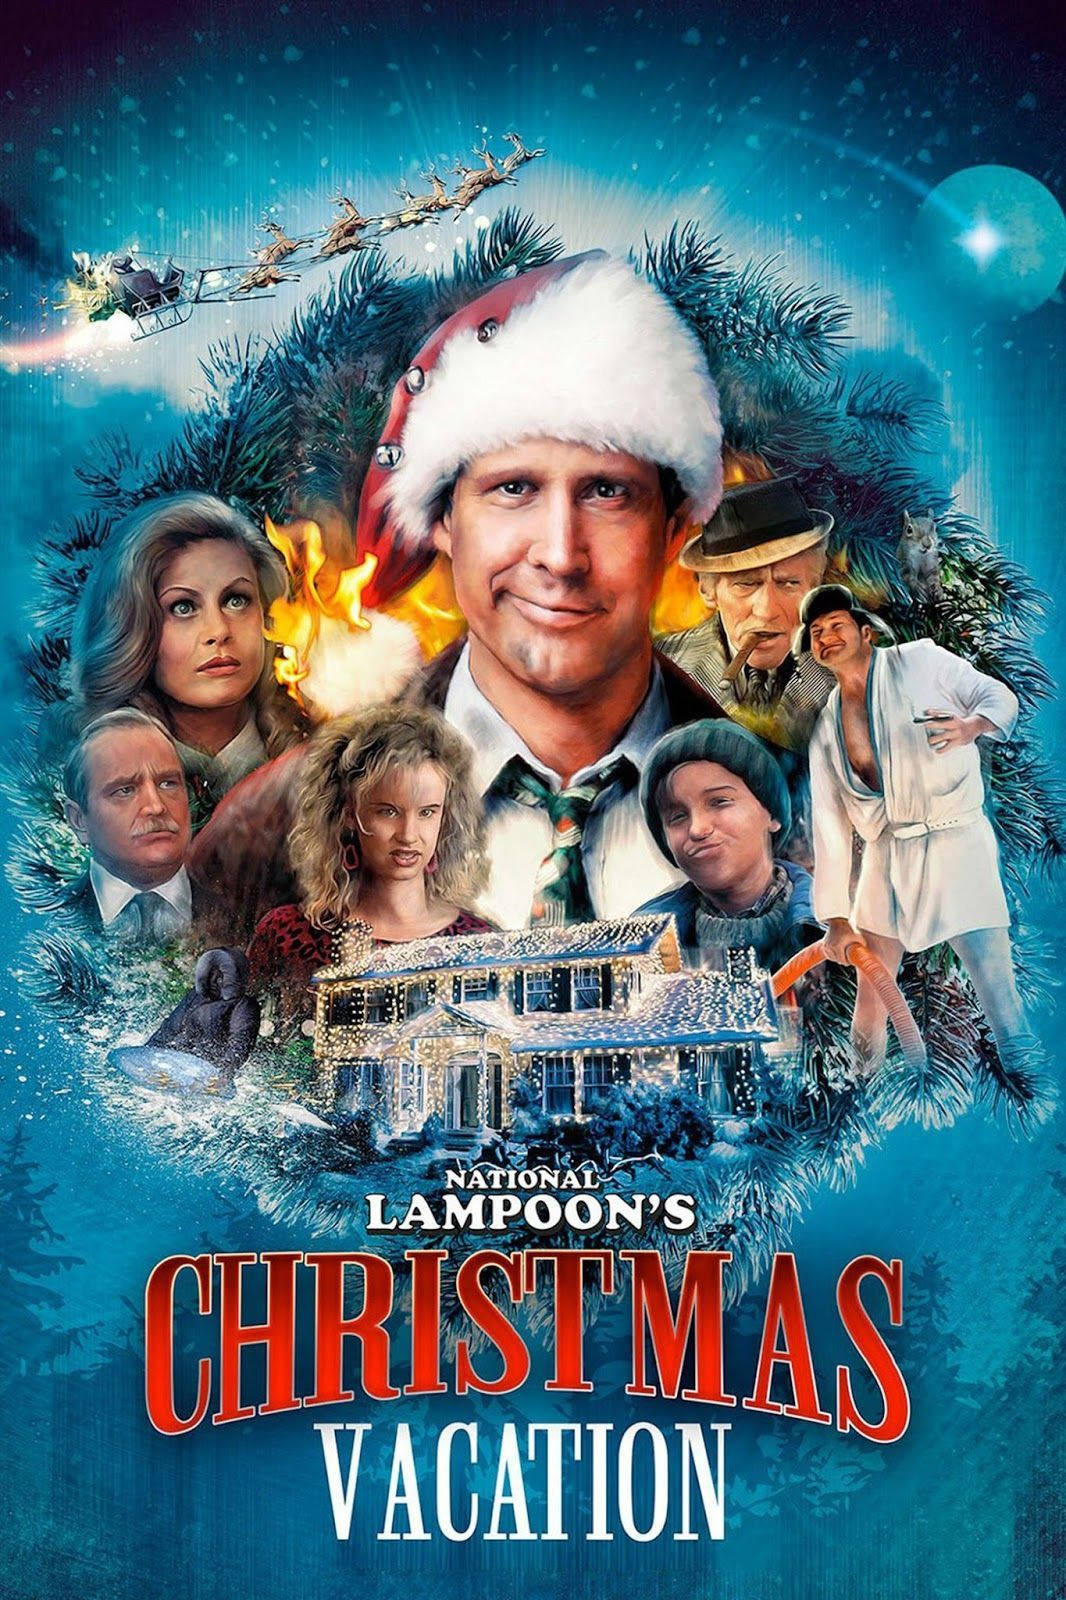 The Poster For Larson's Christmas Vacation Wallpaper